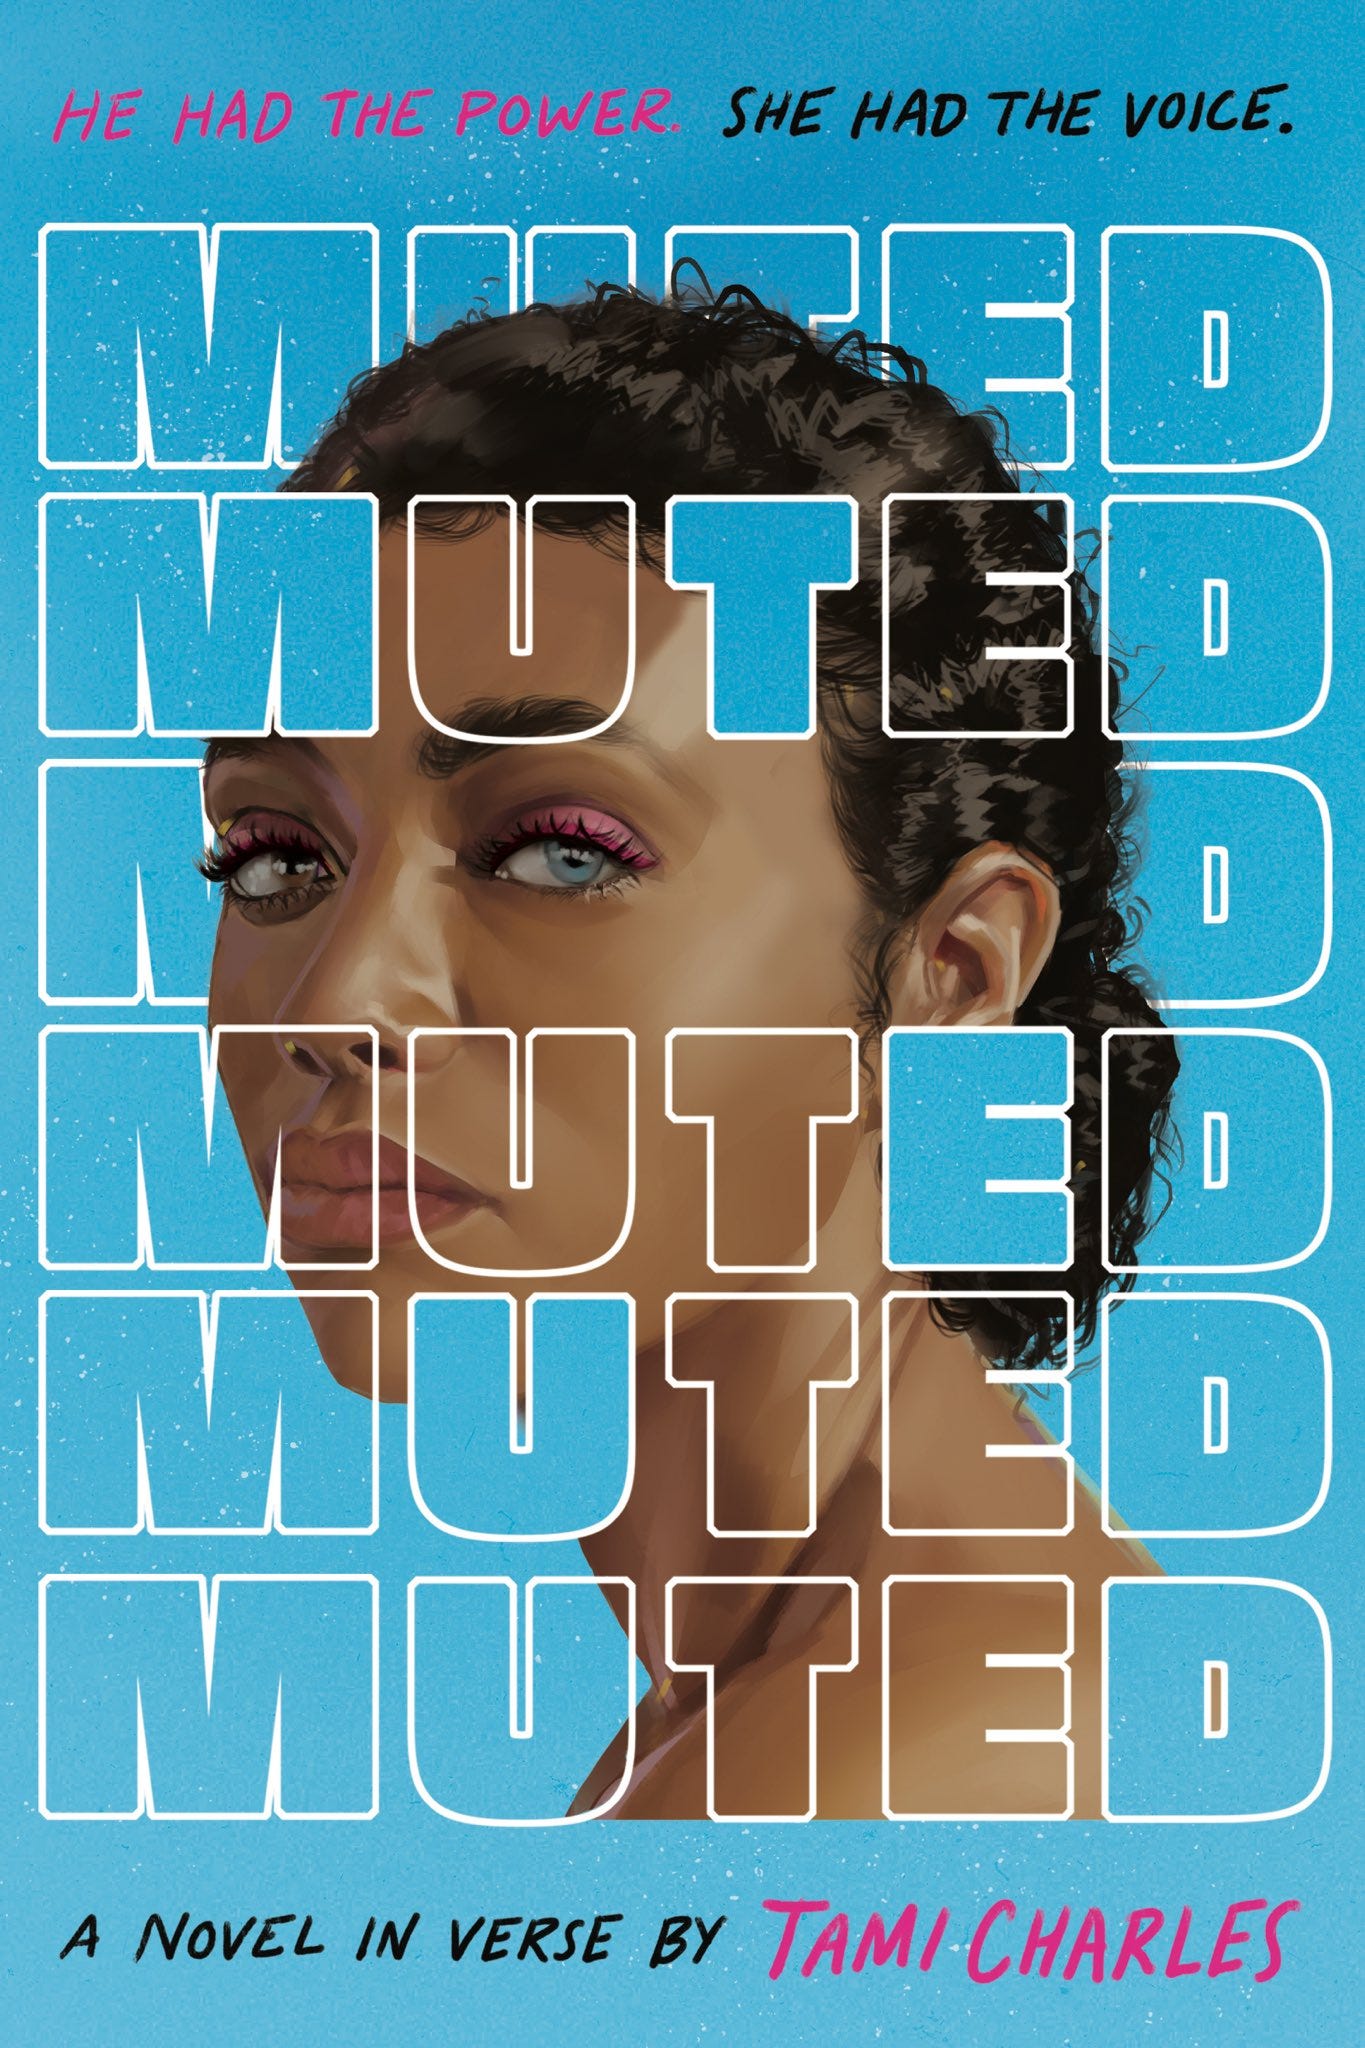 Muted by Tami Charles